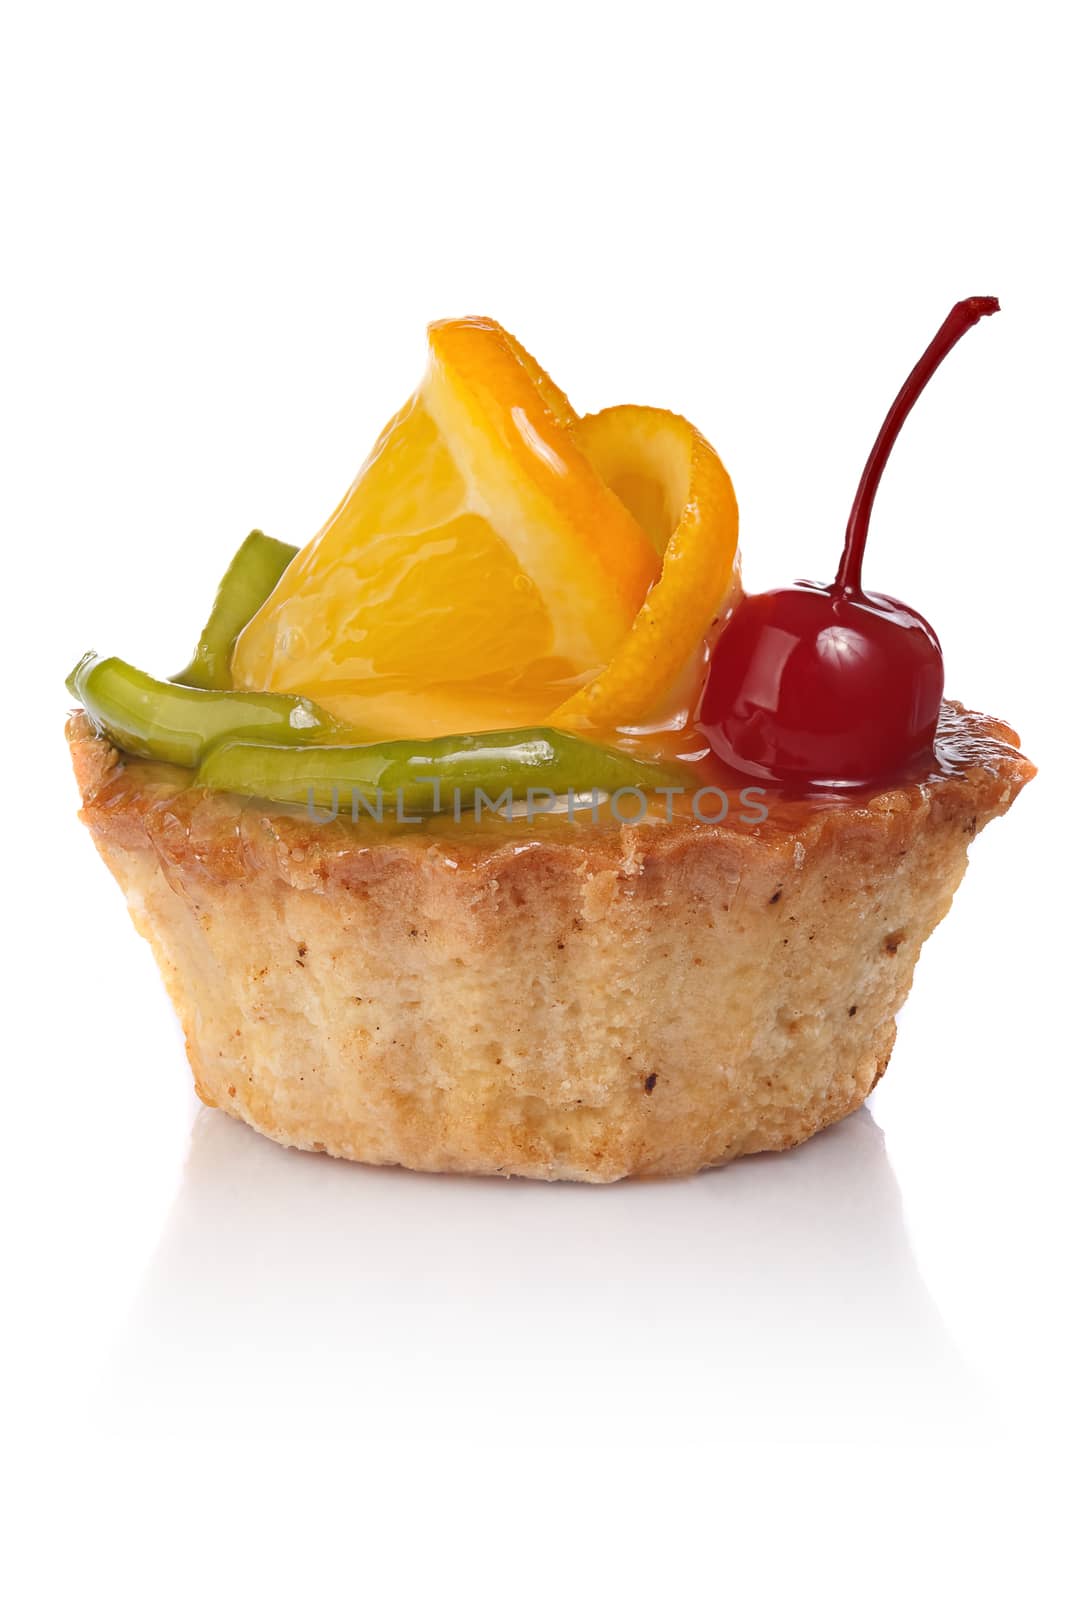 Delicious cake with orange and cherry on a white background.